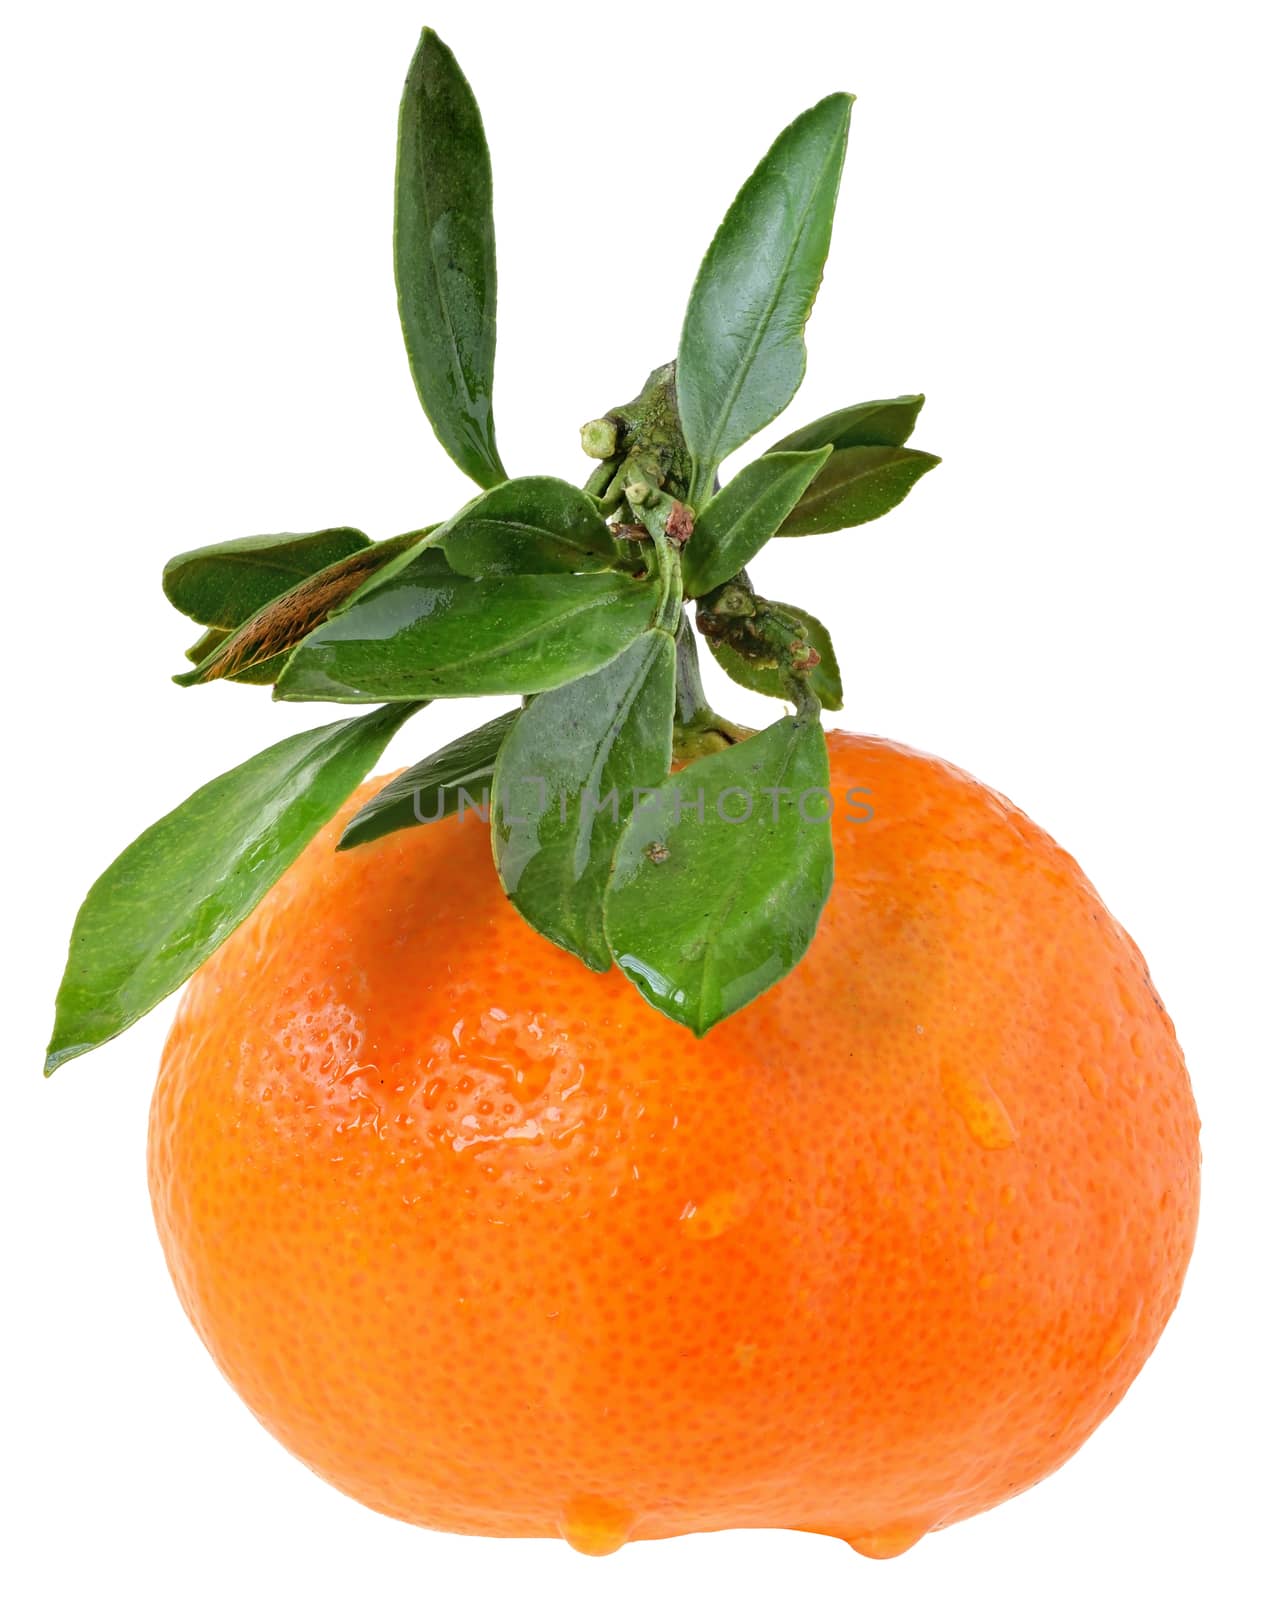 Tangerine with leaves on white background